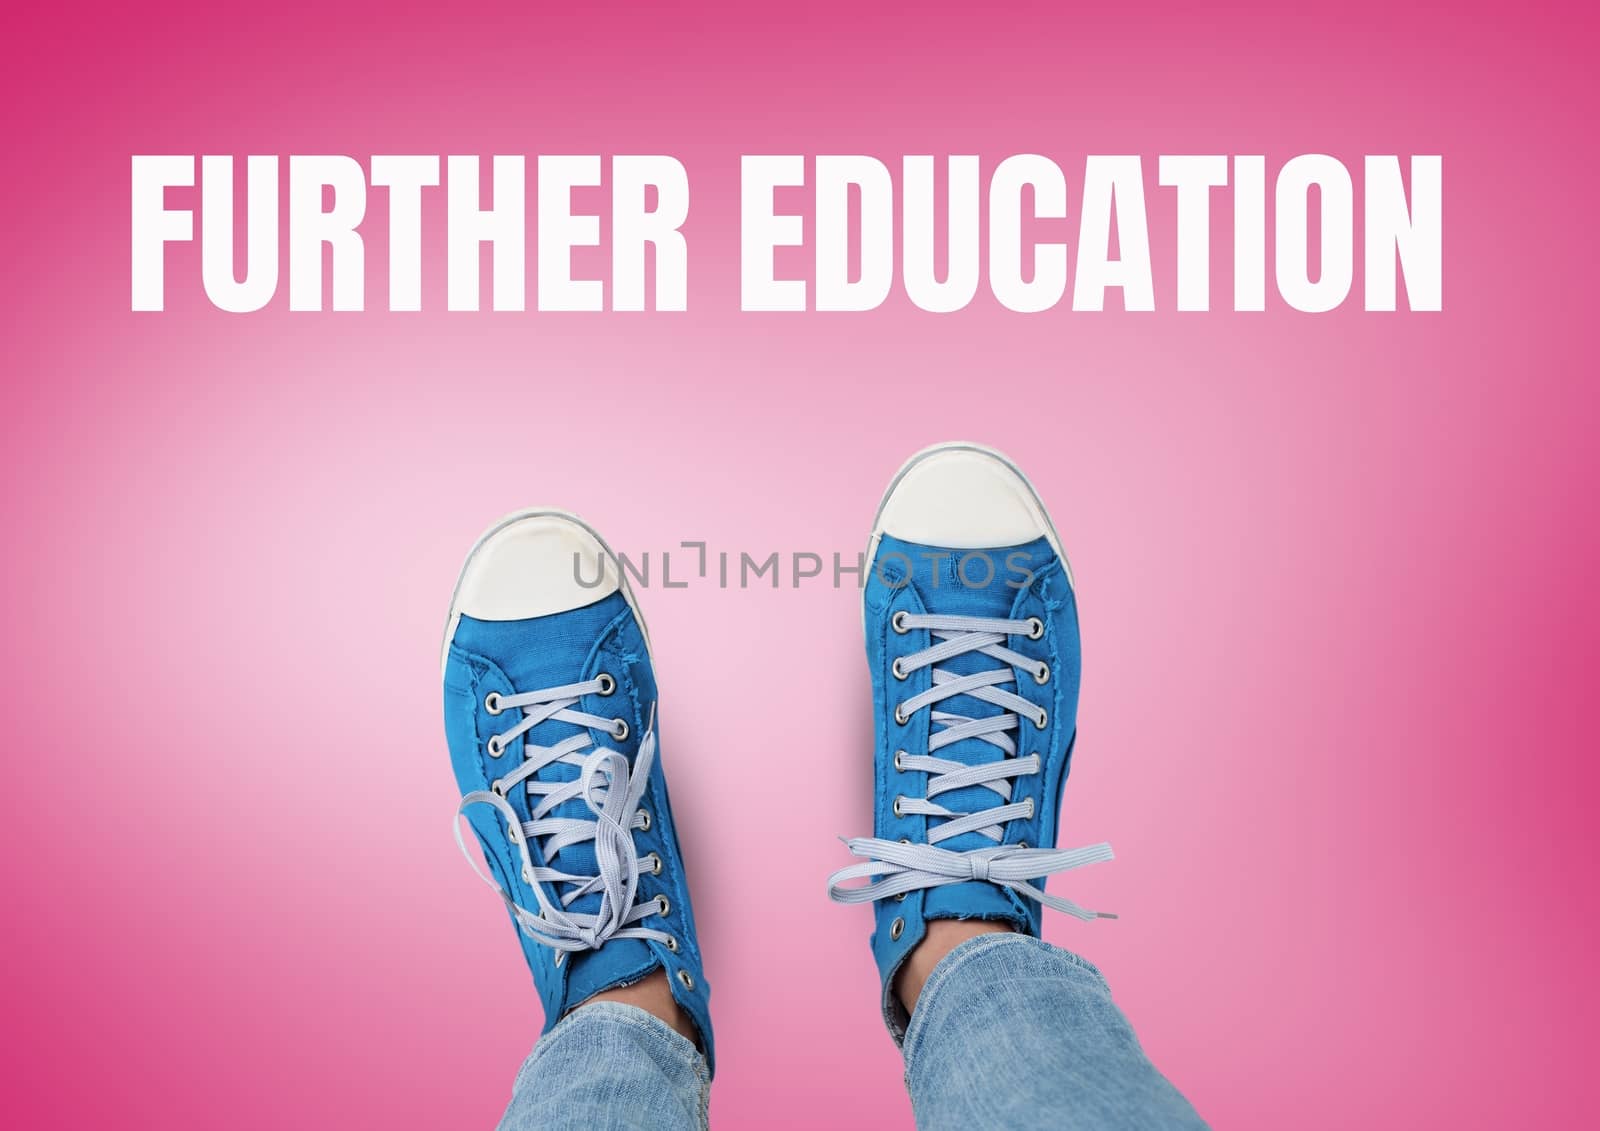 Digital composite of Further Education text and Blue shoes on feet with red background